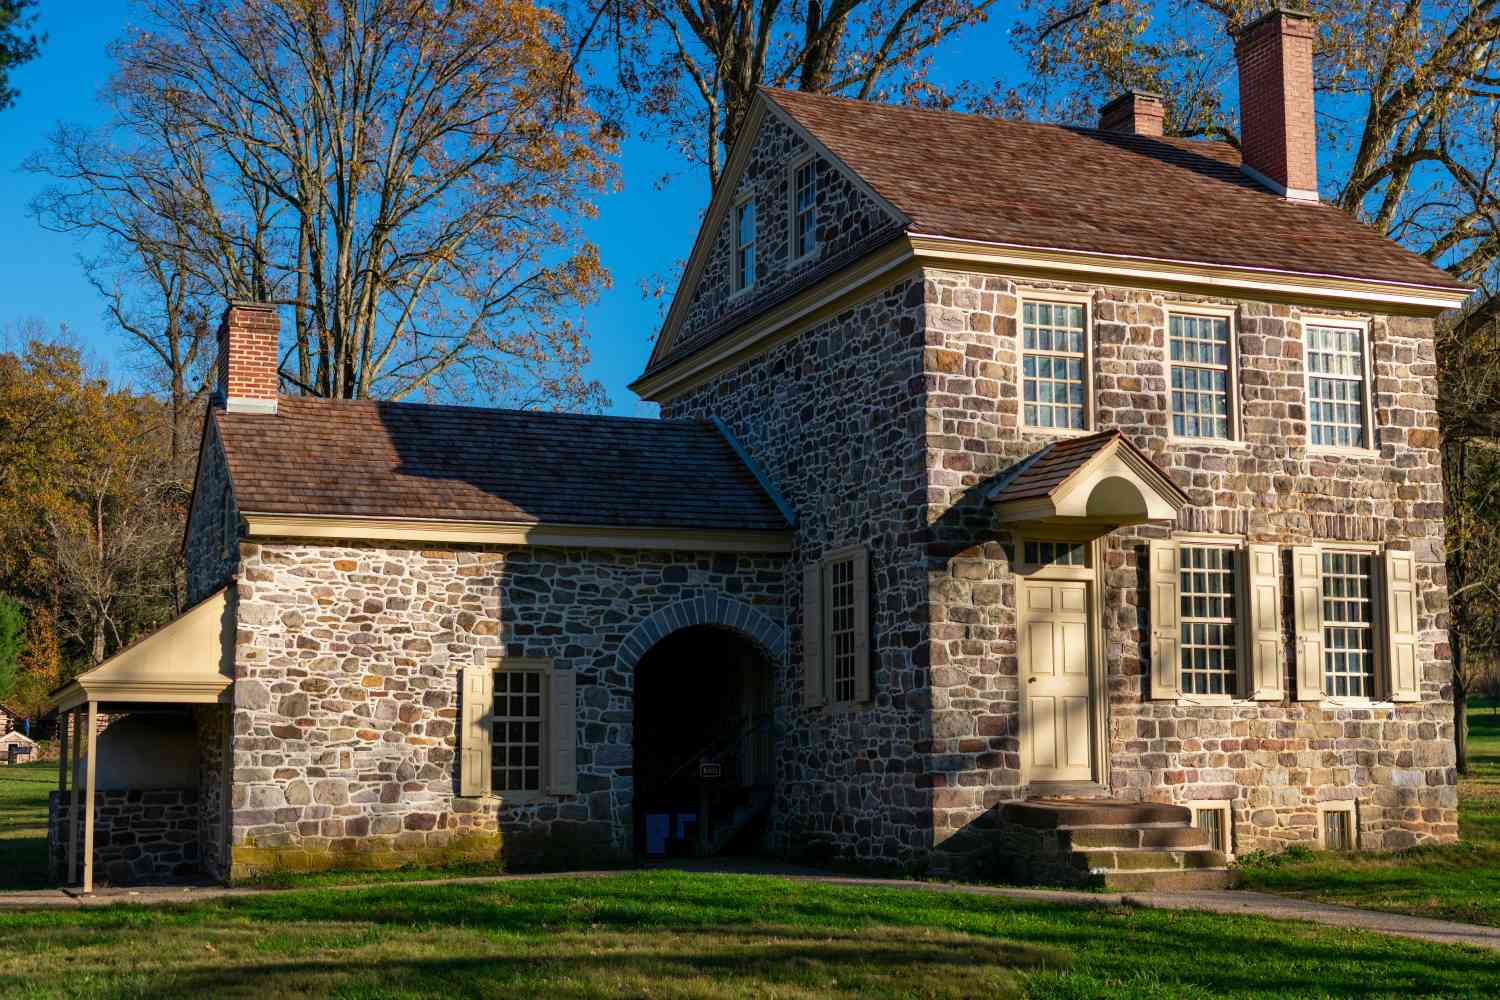 Is Valley Forge worth visiting?